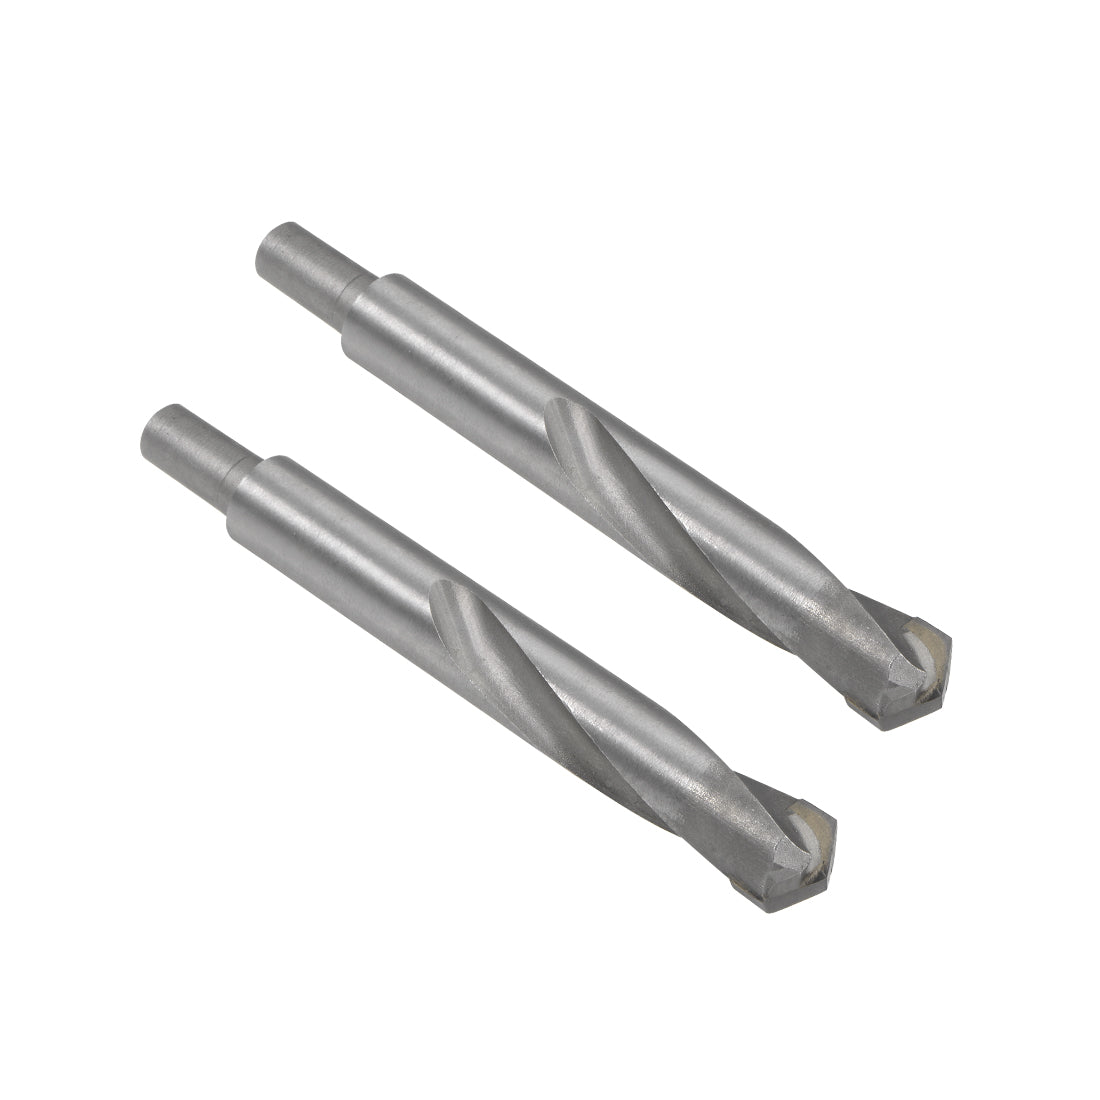 uxcell Uxcell 16mm Cemented Carbide Twist Drill Bits for Stainless Steel Copper Aluminum 2 Pcs